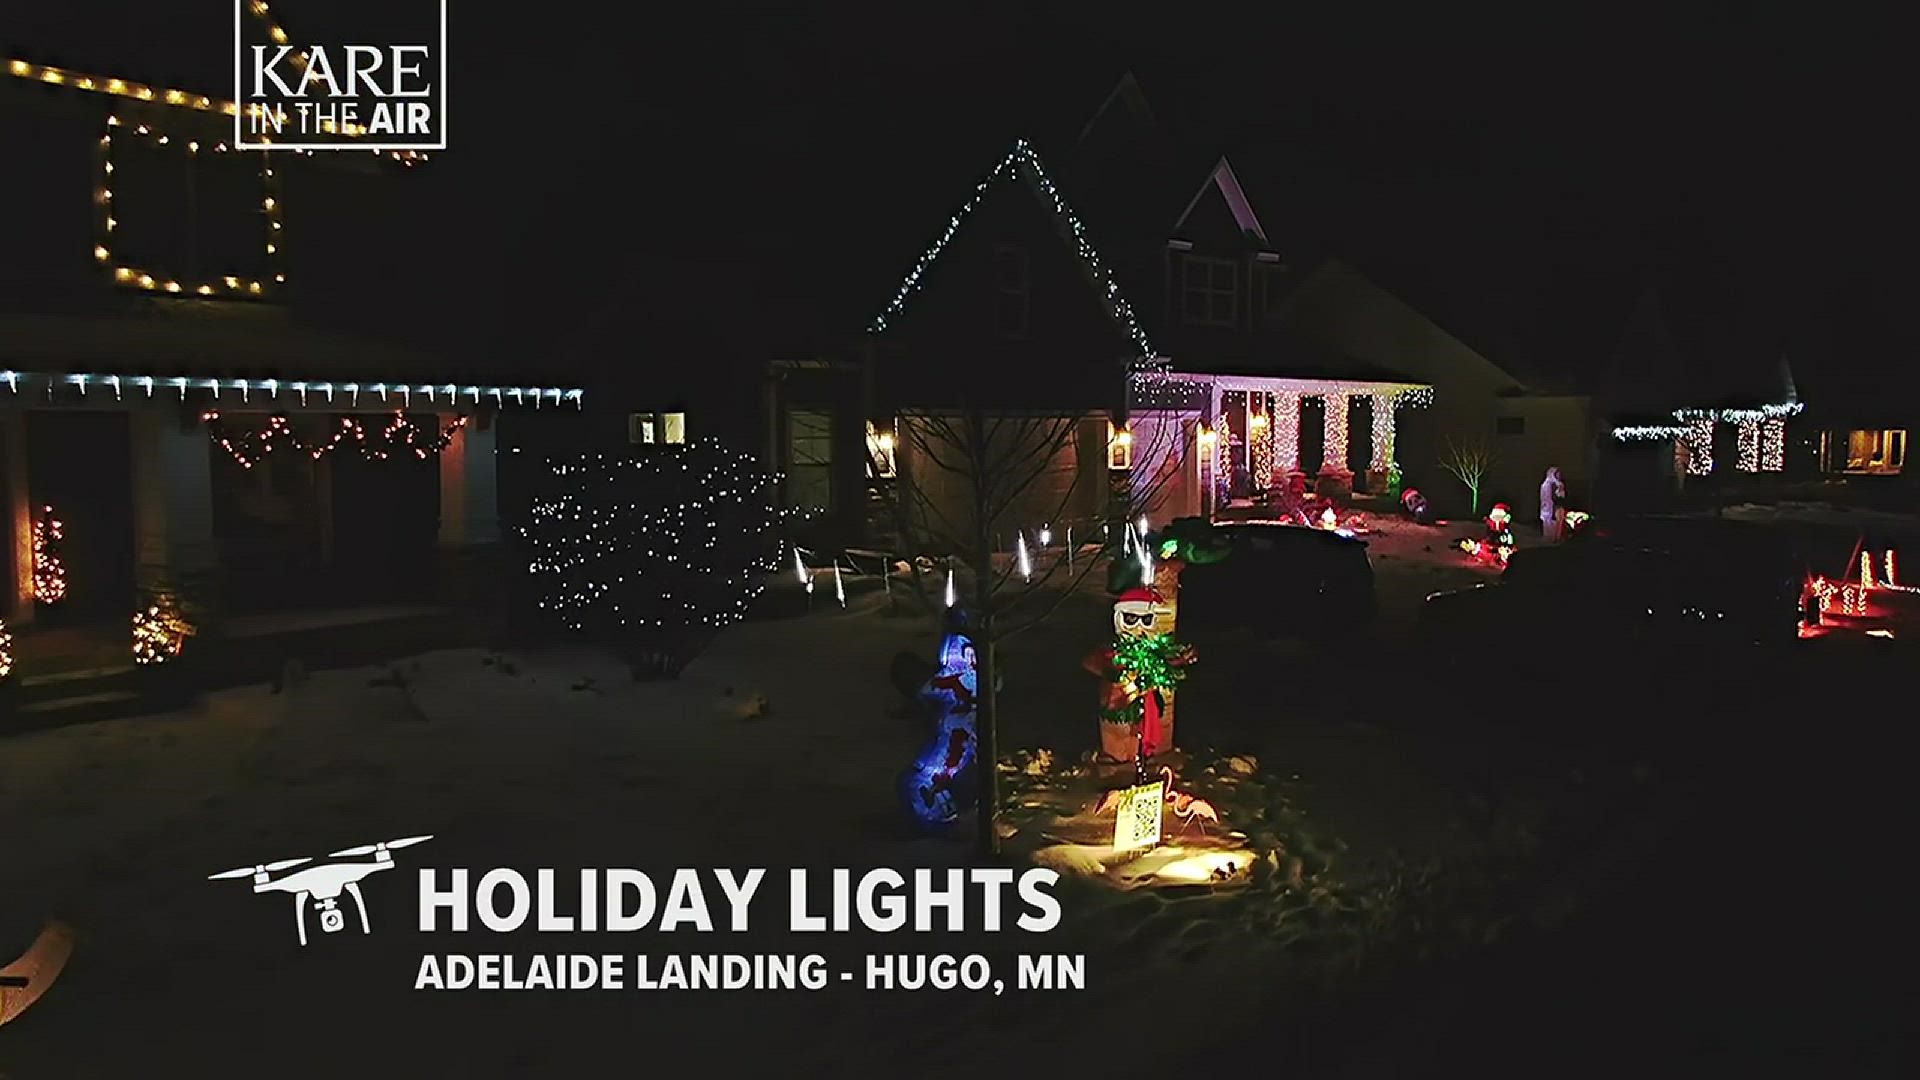 Chris and Amy Dafresne got together with neighbors in Adelaide Landing in Hugo to decorate their homes to their own Christmas song, movie or book theme.